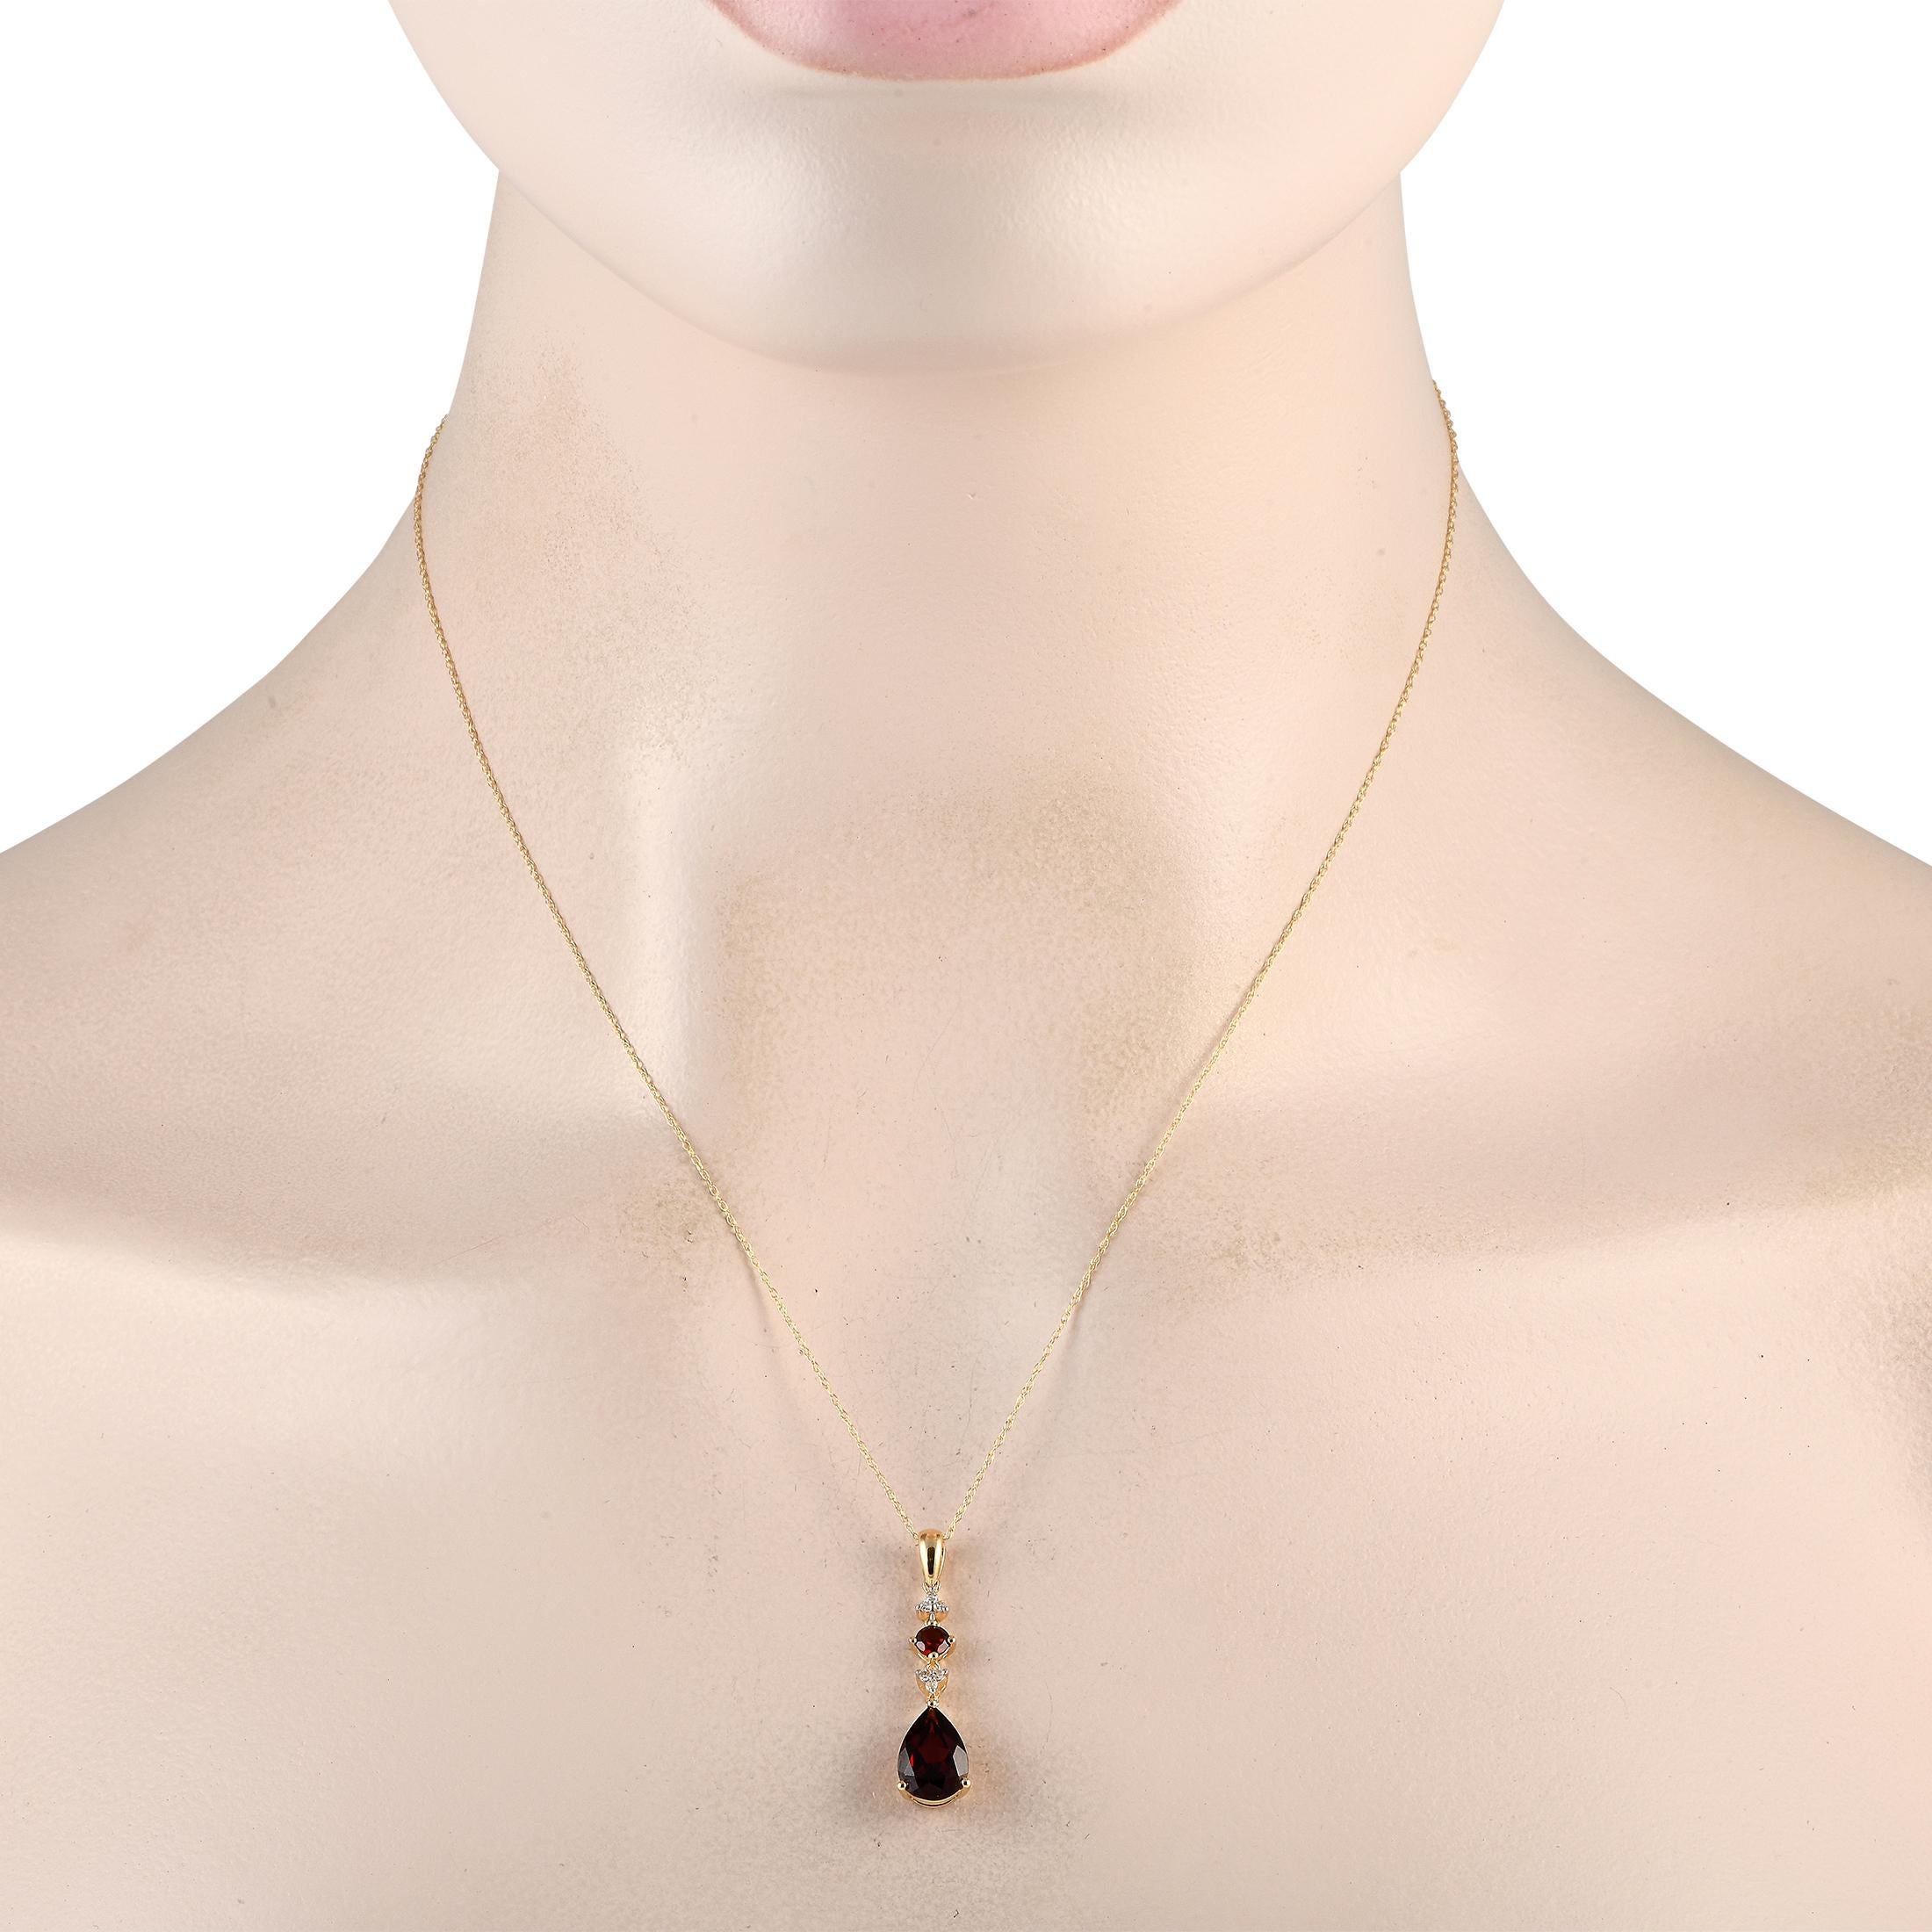 Add a touch of sophistication to any ensemble with this simple, elegant necklace. Suspended from an 18 chain, youll find a 14K Yellow Gold pendant measuring 1.25 long and 0.25 wide. Captivating Garnet gemstones add a dash of color, while sparkling